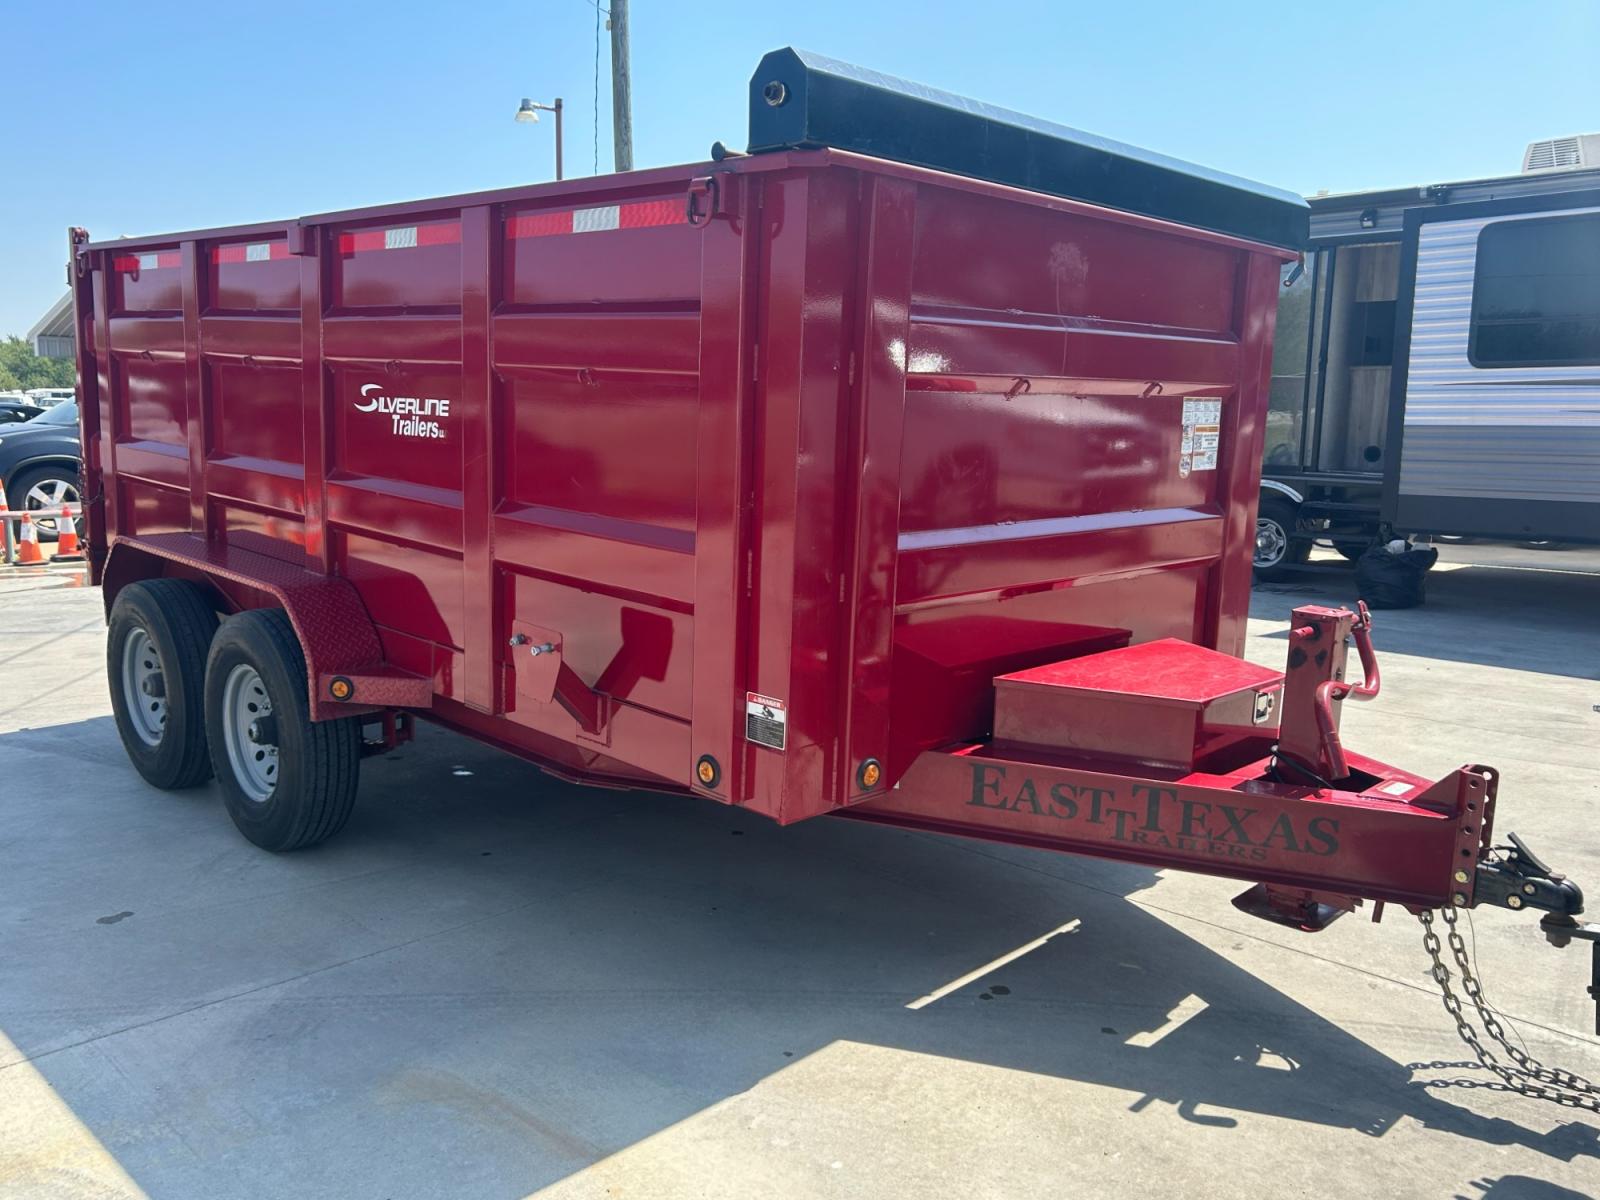 2022 RED EAST TEXAS TRAILER DUMPBED (58SBD1420NE) , located at 17760 Hwy 62, Morris, OK, 74445, 35.609104, -95.877060 - 2022 SILVERLINE TRAILER 83X14 FEATURES 2 7,000 LB DEXTER SPRING AXLES, 2 ELEC FSA BRAKES, COUPLER 2-5/16" ADJUSTABLE (6 HOLE), DIAMOND PLATE FENDERS, 16" CROSS-MEMBERS, 48" DUMP SIDES, 48" 3 WAY GATE, MESH ROLL TARP SYSTEM, JACK SPRING LOADED DROP LEG, 4 3'' D-RINGS, TOOL BOX IN TONGUE, SCISSOR HOIS - Photo #2